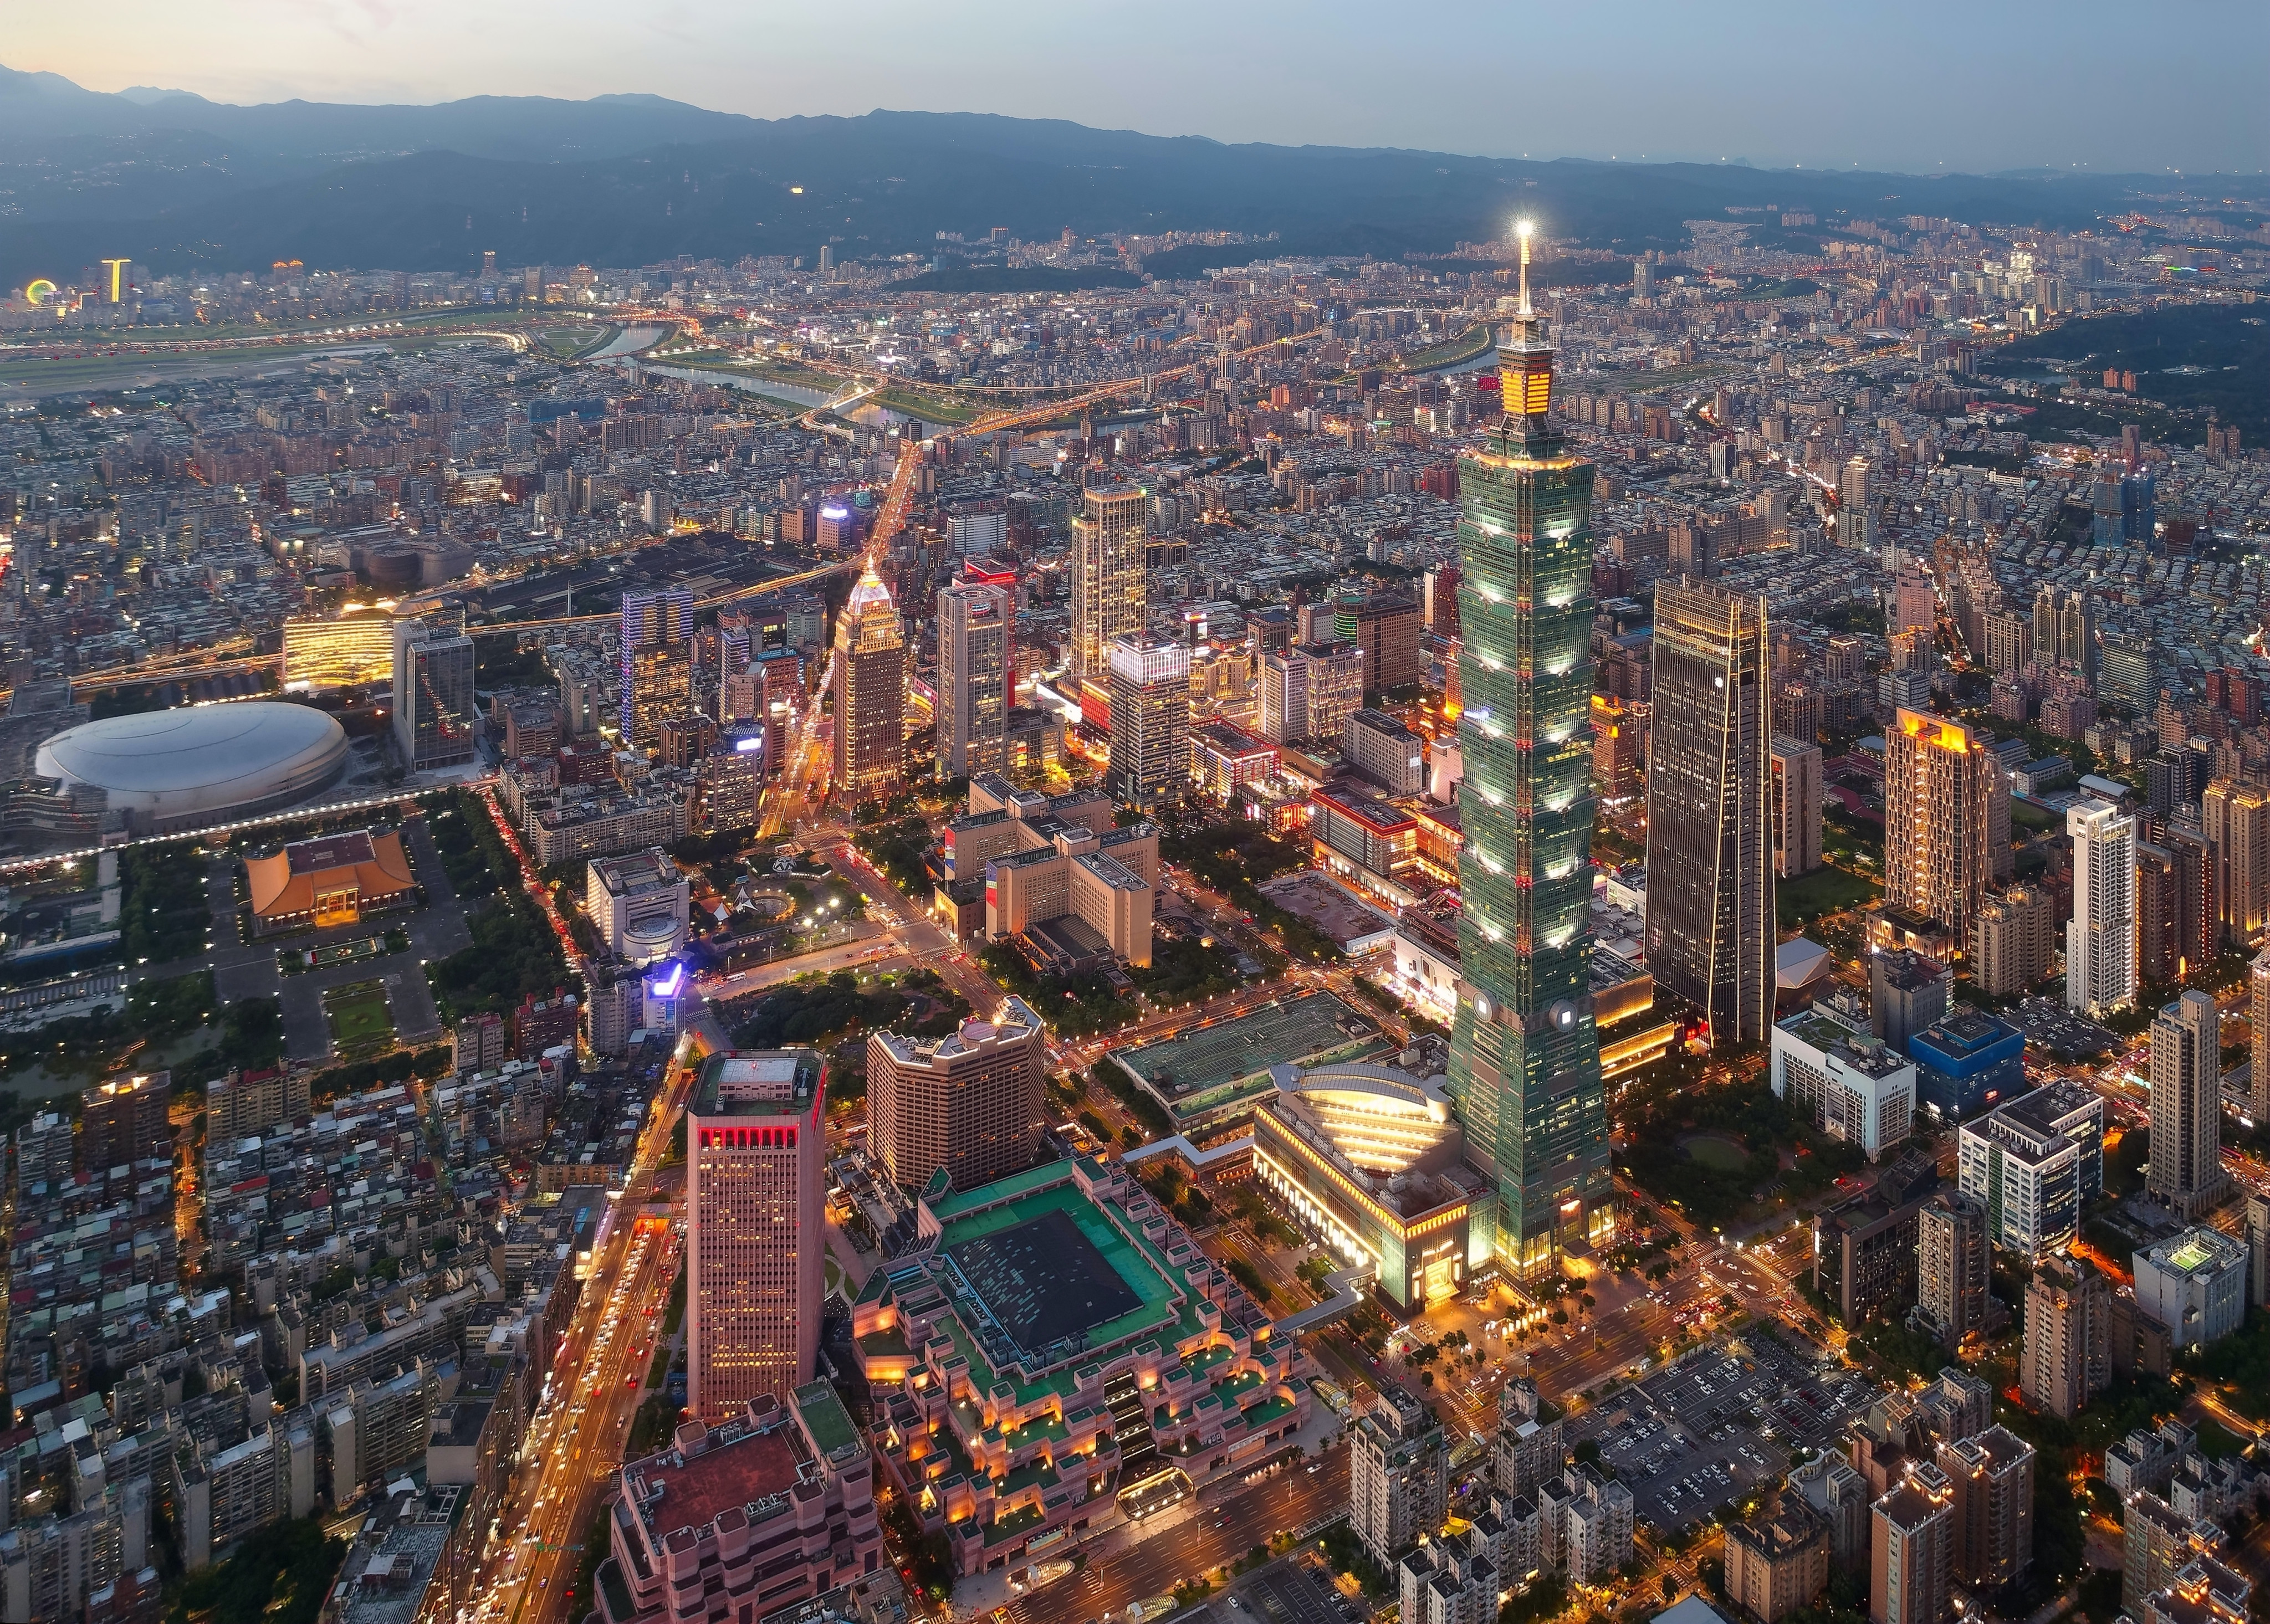 Downtown Taipei at dusk. Taiwan is wooing international visitors to its vibrant capital and other destinations with a discount card for arrivals. Other island destinations such as Sicily and Hong Kong have similar campaigns. Photo: Shutterstock